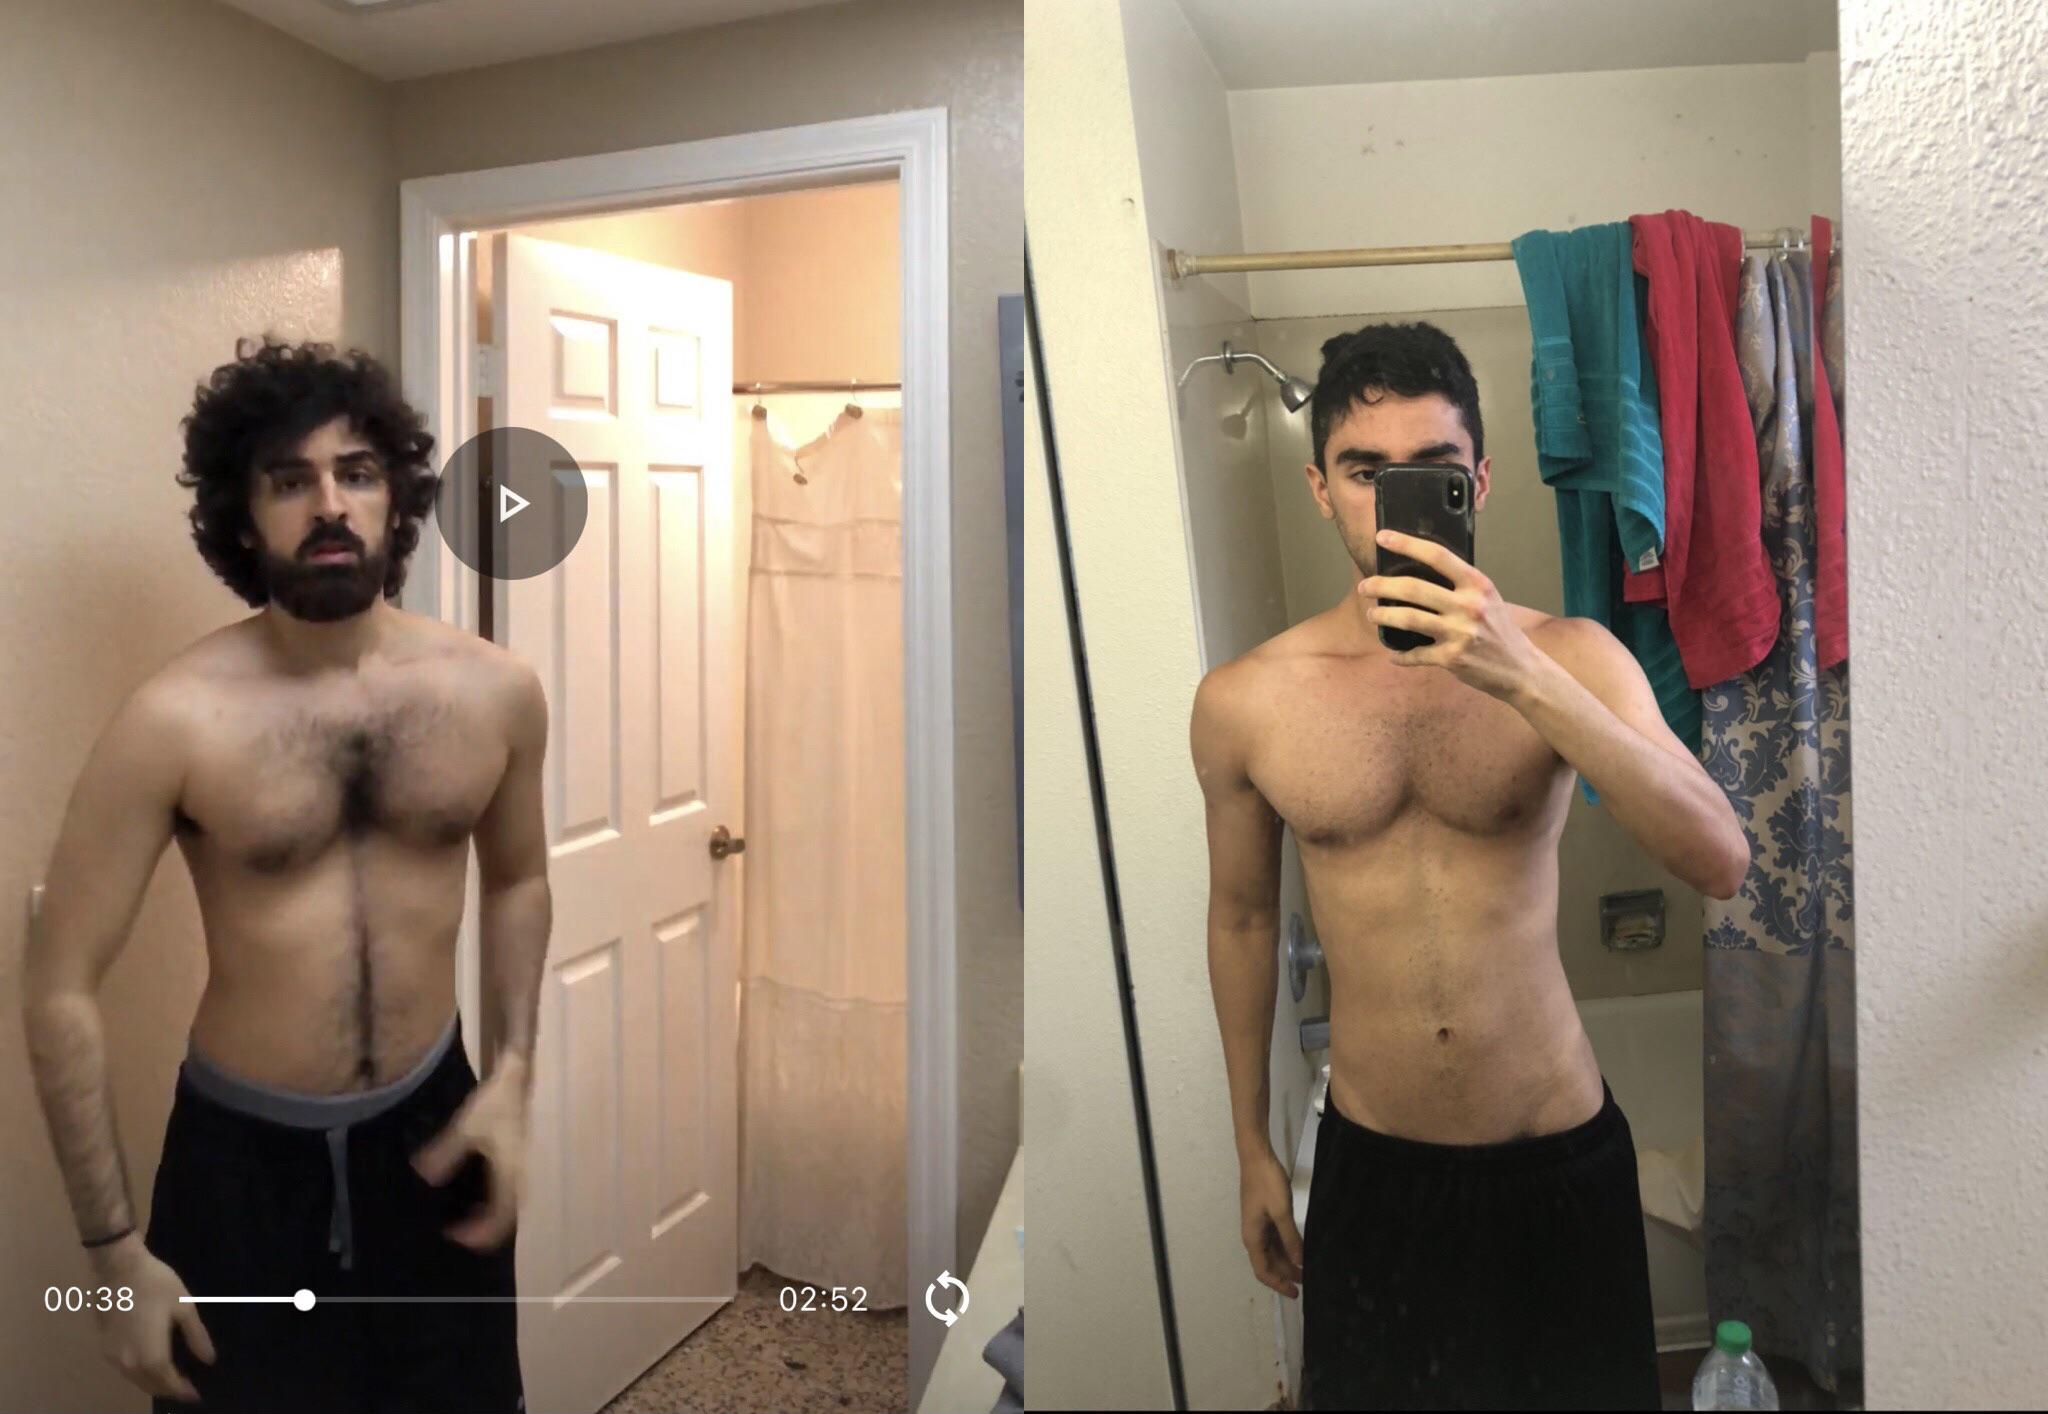 20 lbs Fat Loss Before and After 5 foot 7 Male 150 lbs to 130 lbs.